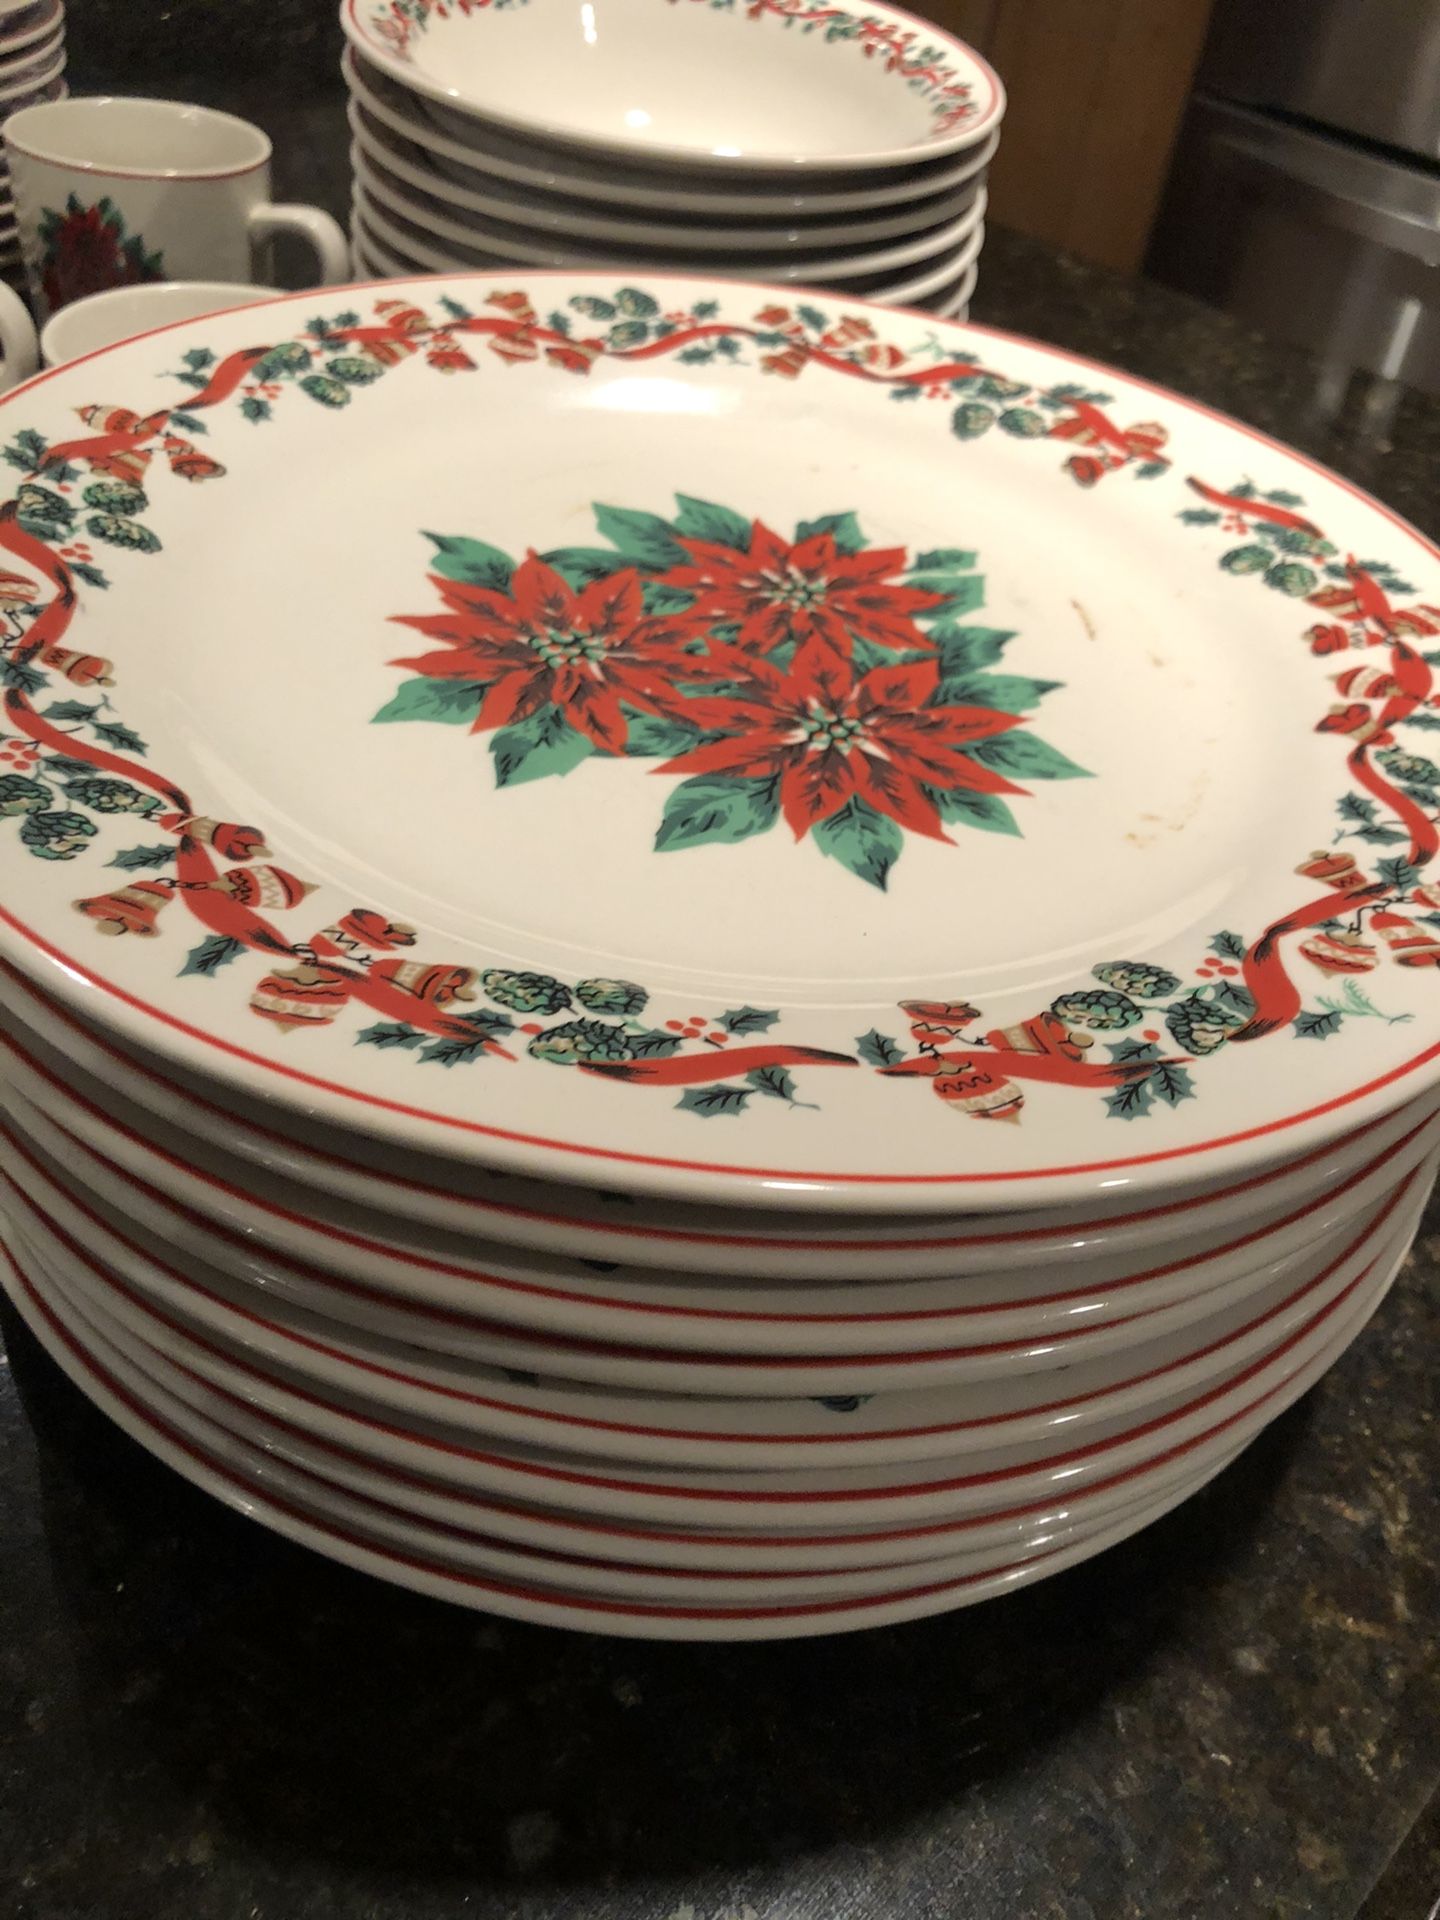 Sale pending… Holiday table setting for Ten / dinner plates, bowls, mugs and saucers